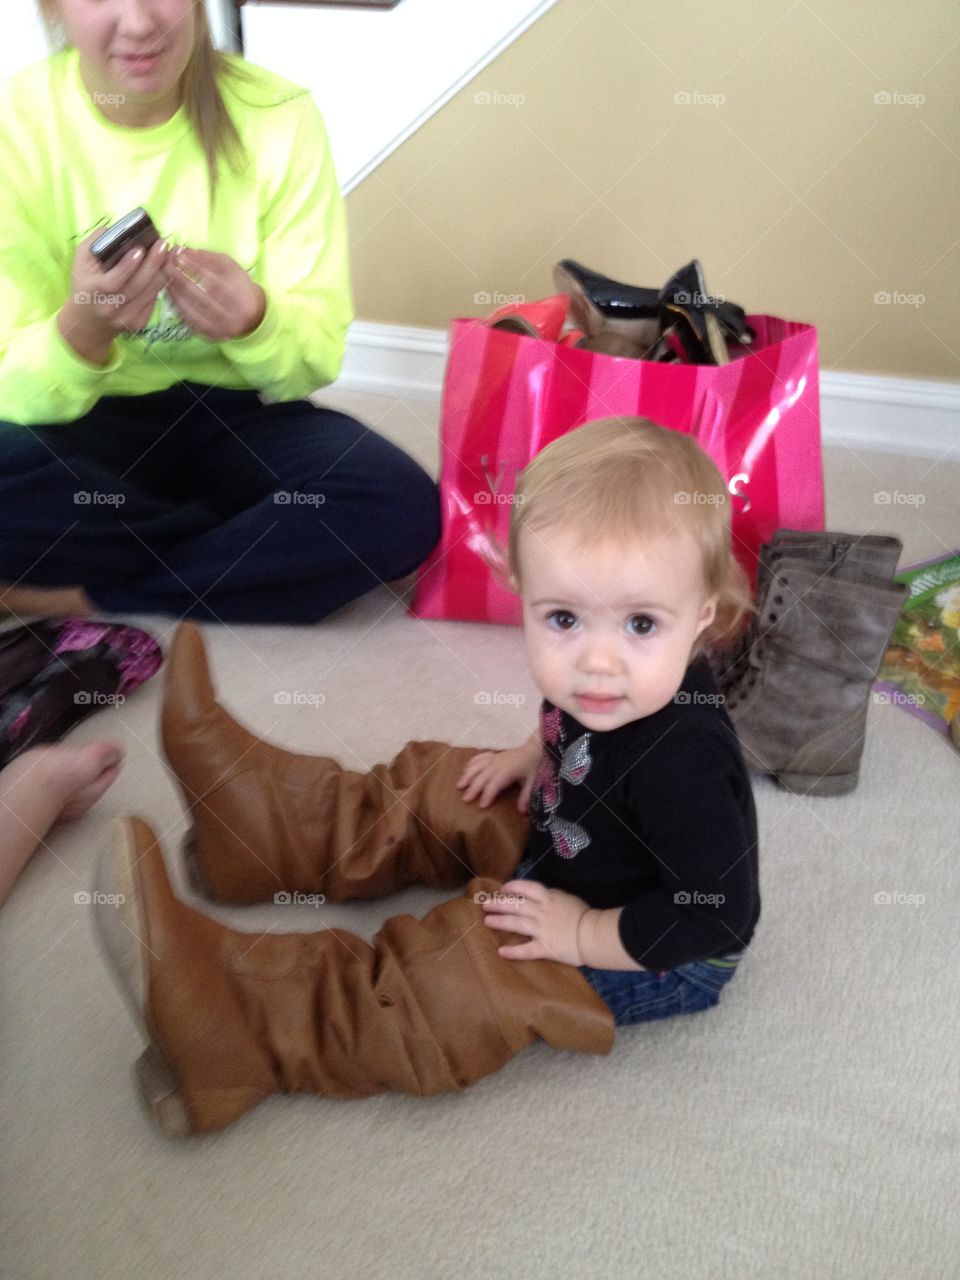 A girl and her boots